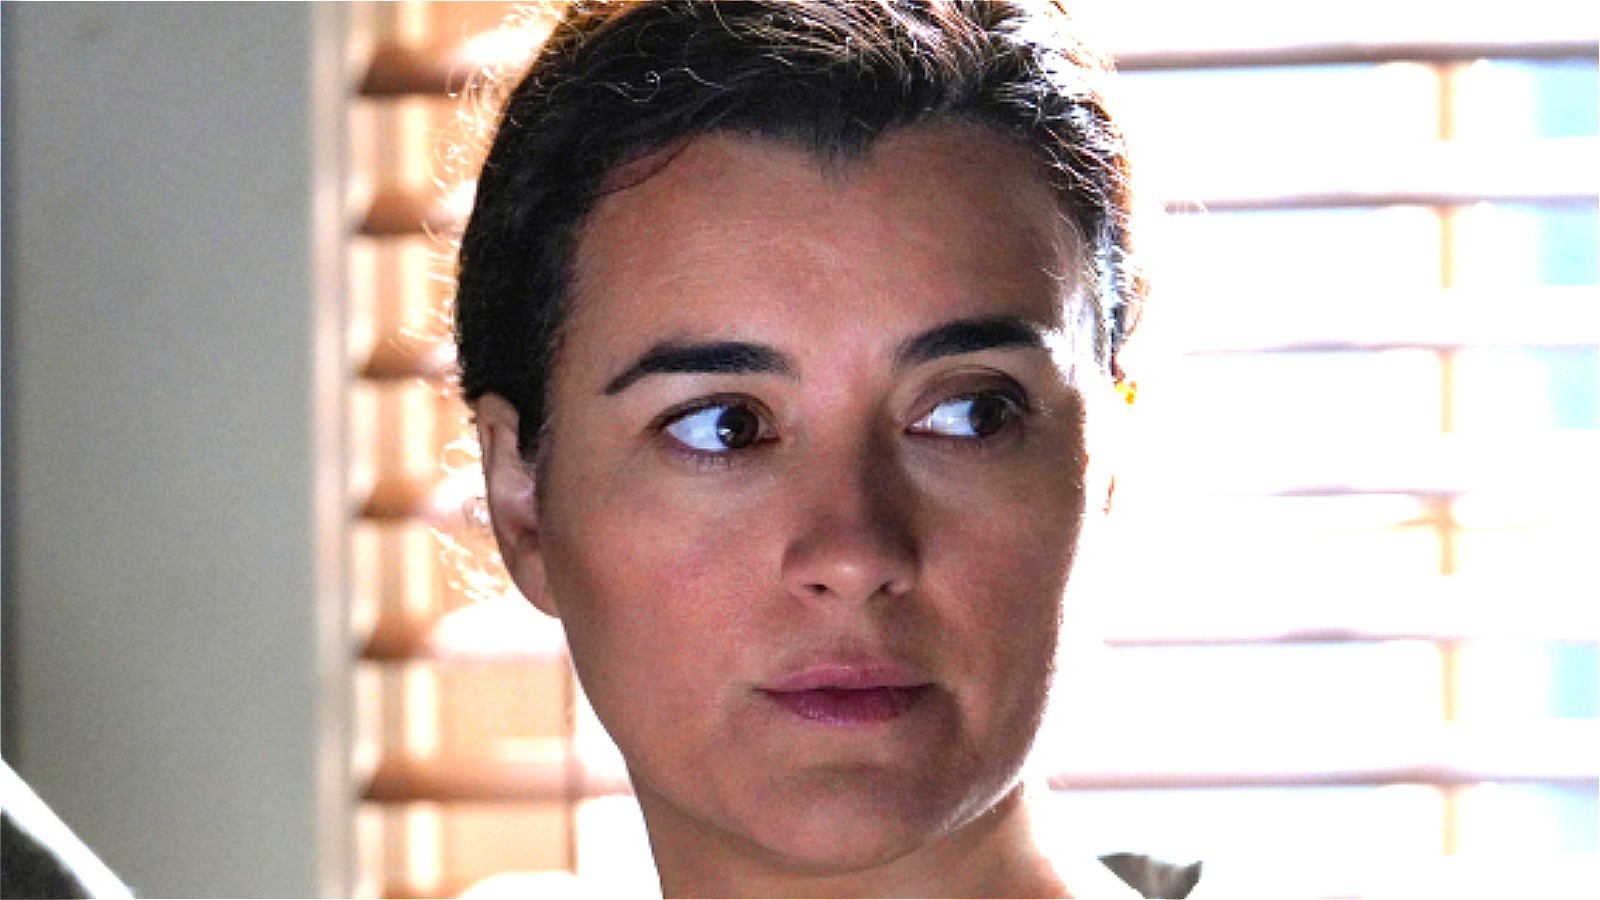 The Staggering Number Of NCIS Episodes Cote De Pablo Actually Filmed